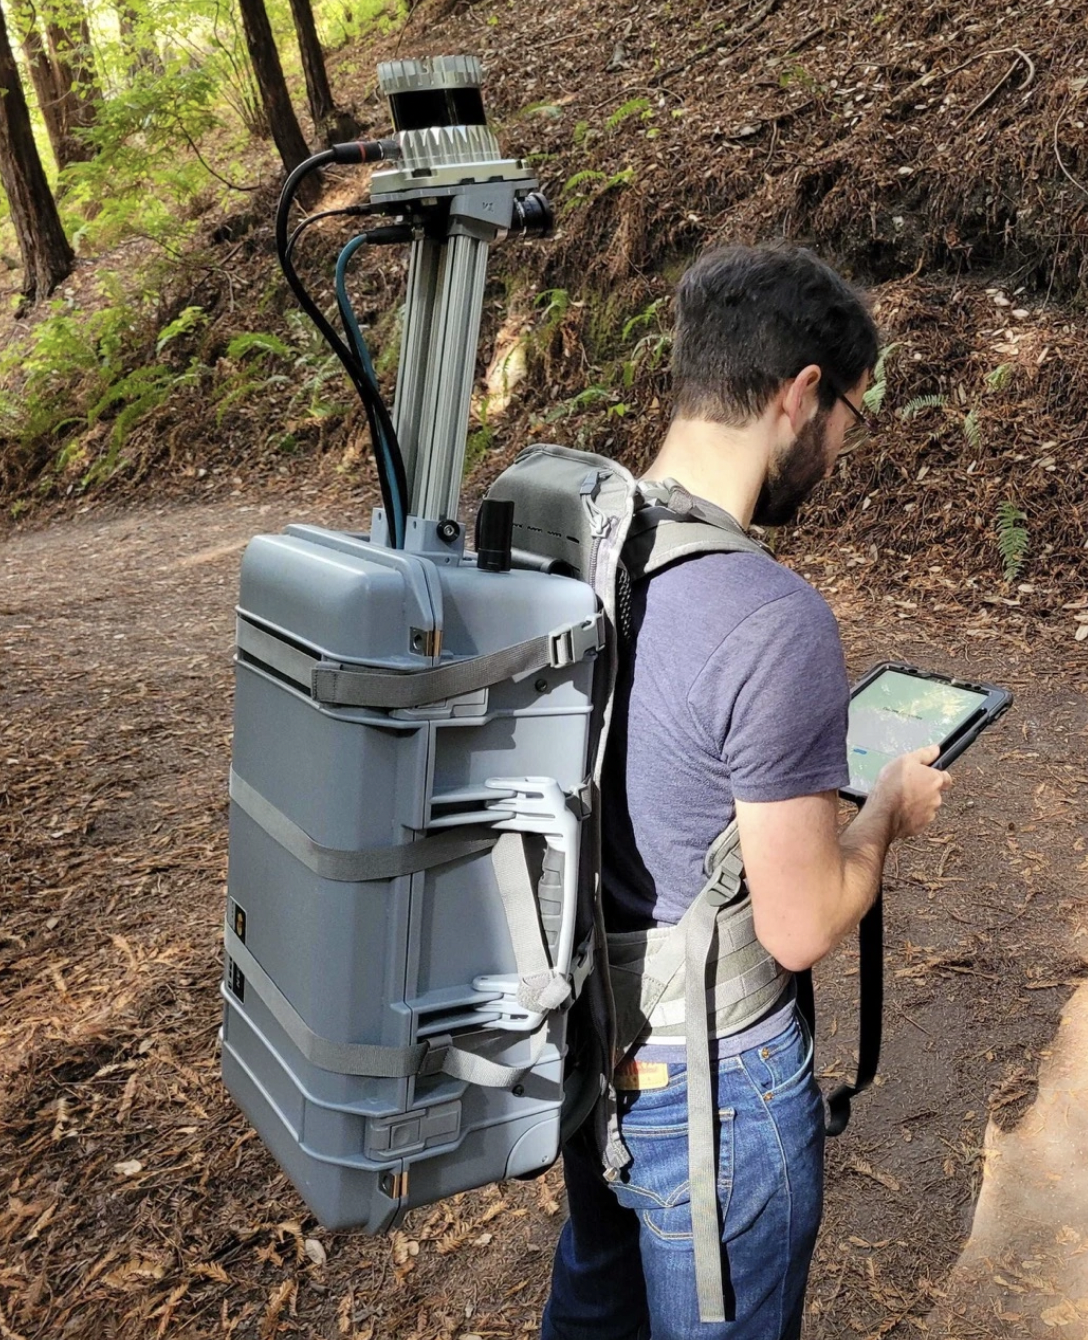 Gaia AI uses LiDAR to gather data about the forest